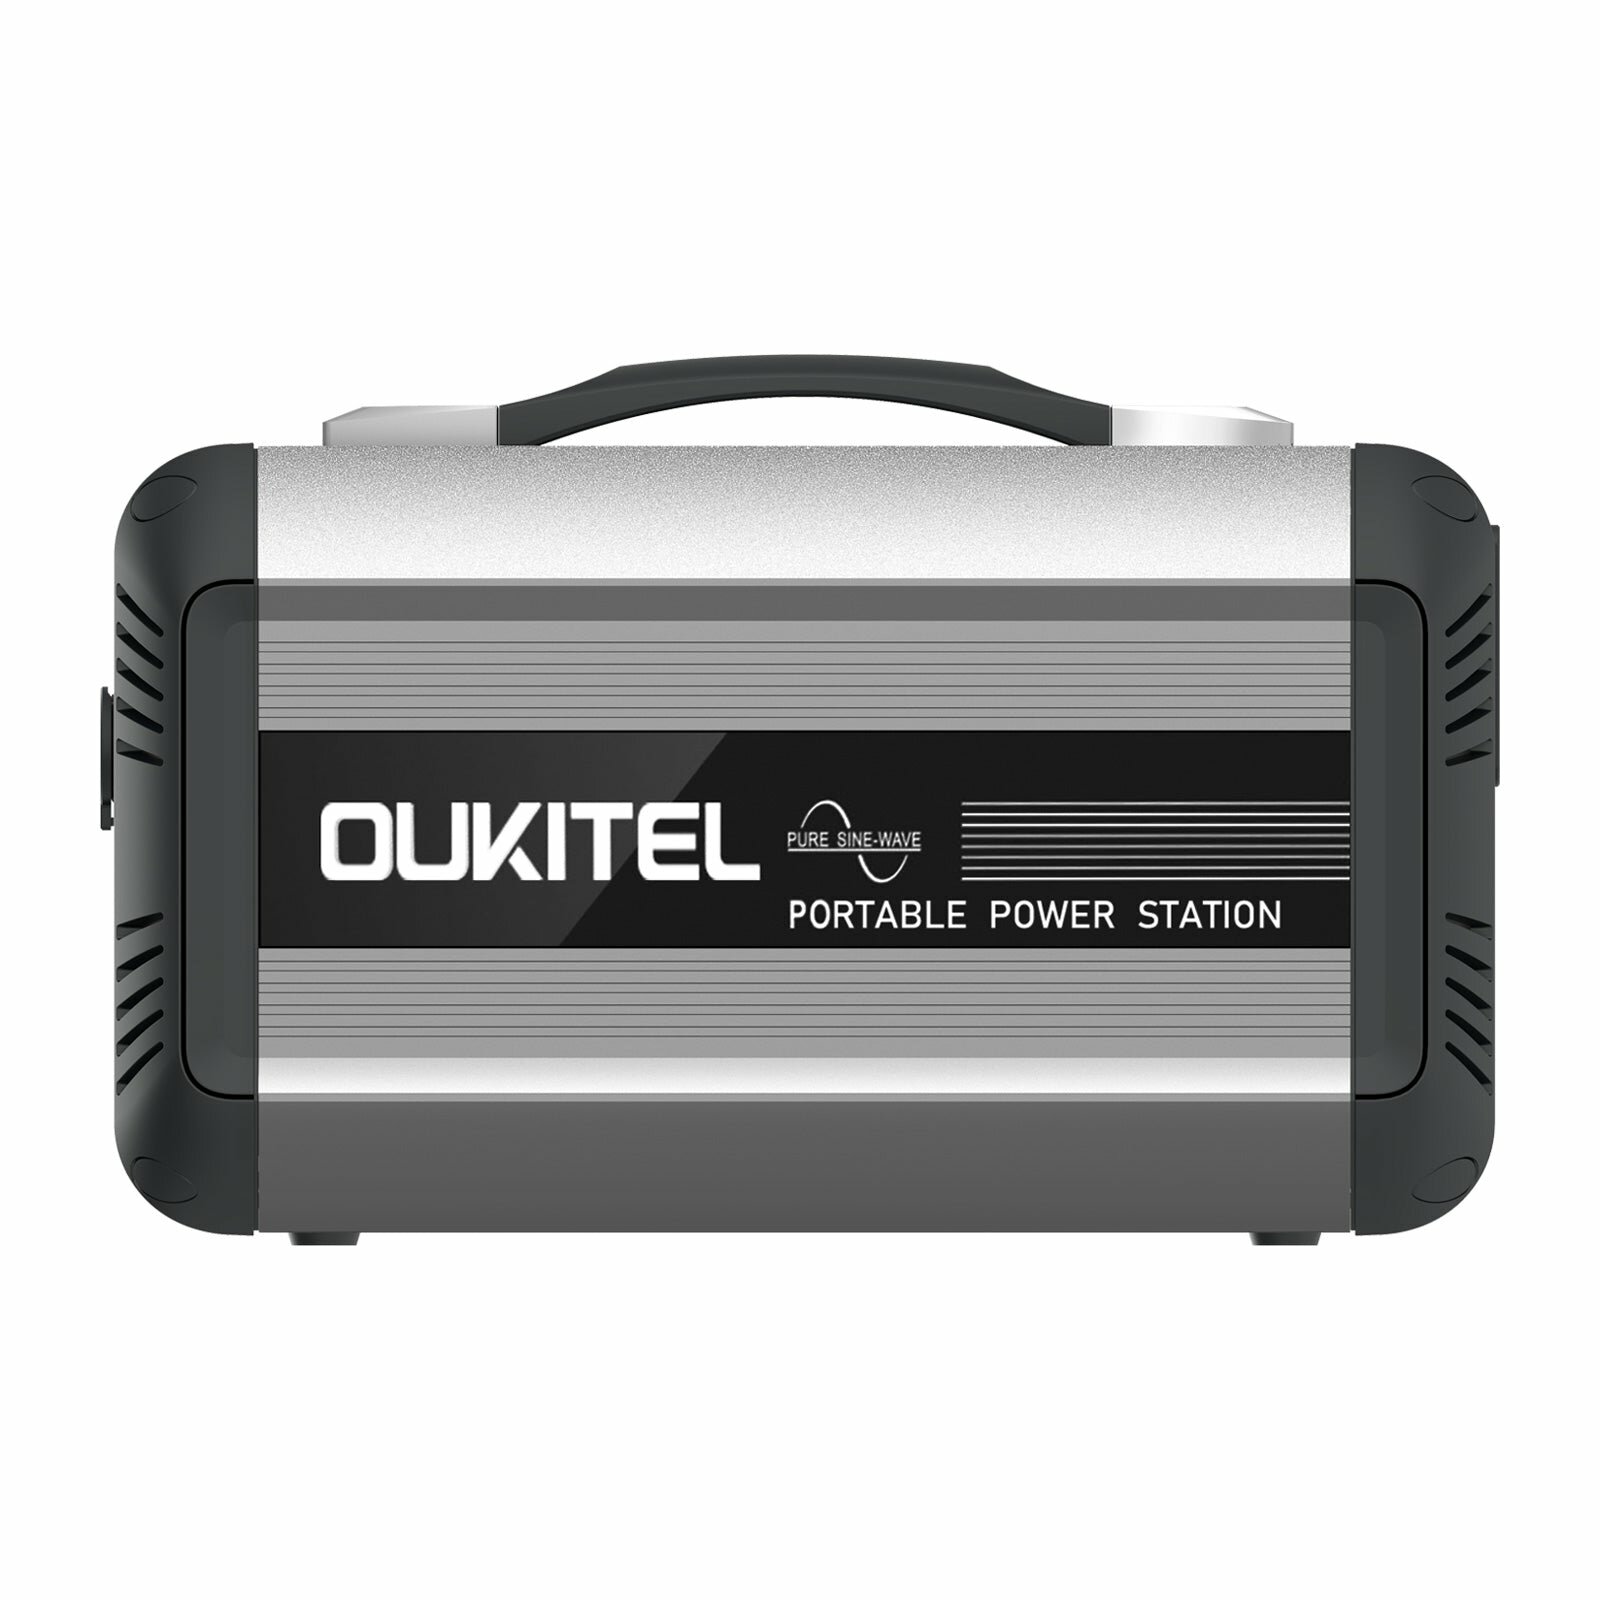 [Japan Direct] OUKITEL CN505 614Wh 500W Portable Power Station LiFePO4 Lithium Iron Battery Back with 10 Versatile Outlets For Home Tool Outdoor Camping Devices